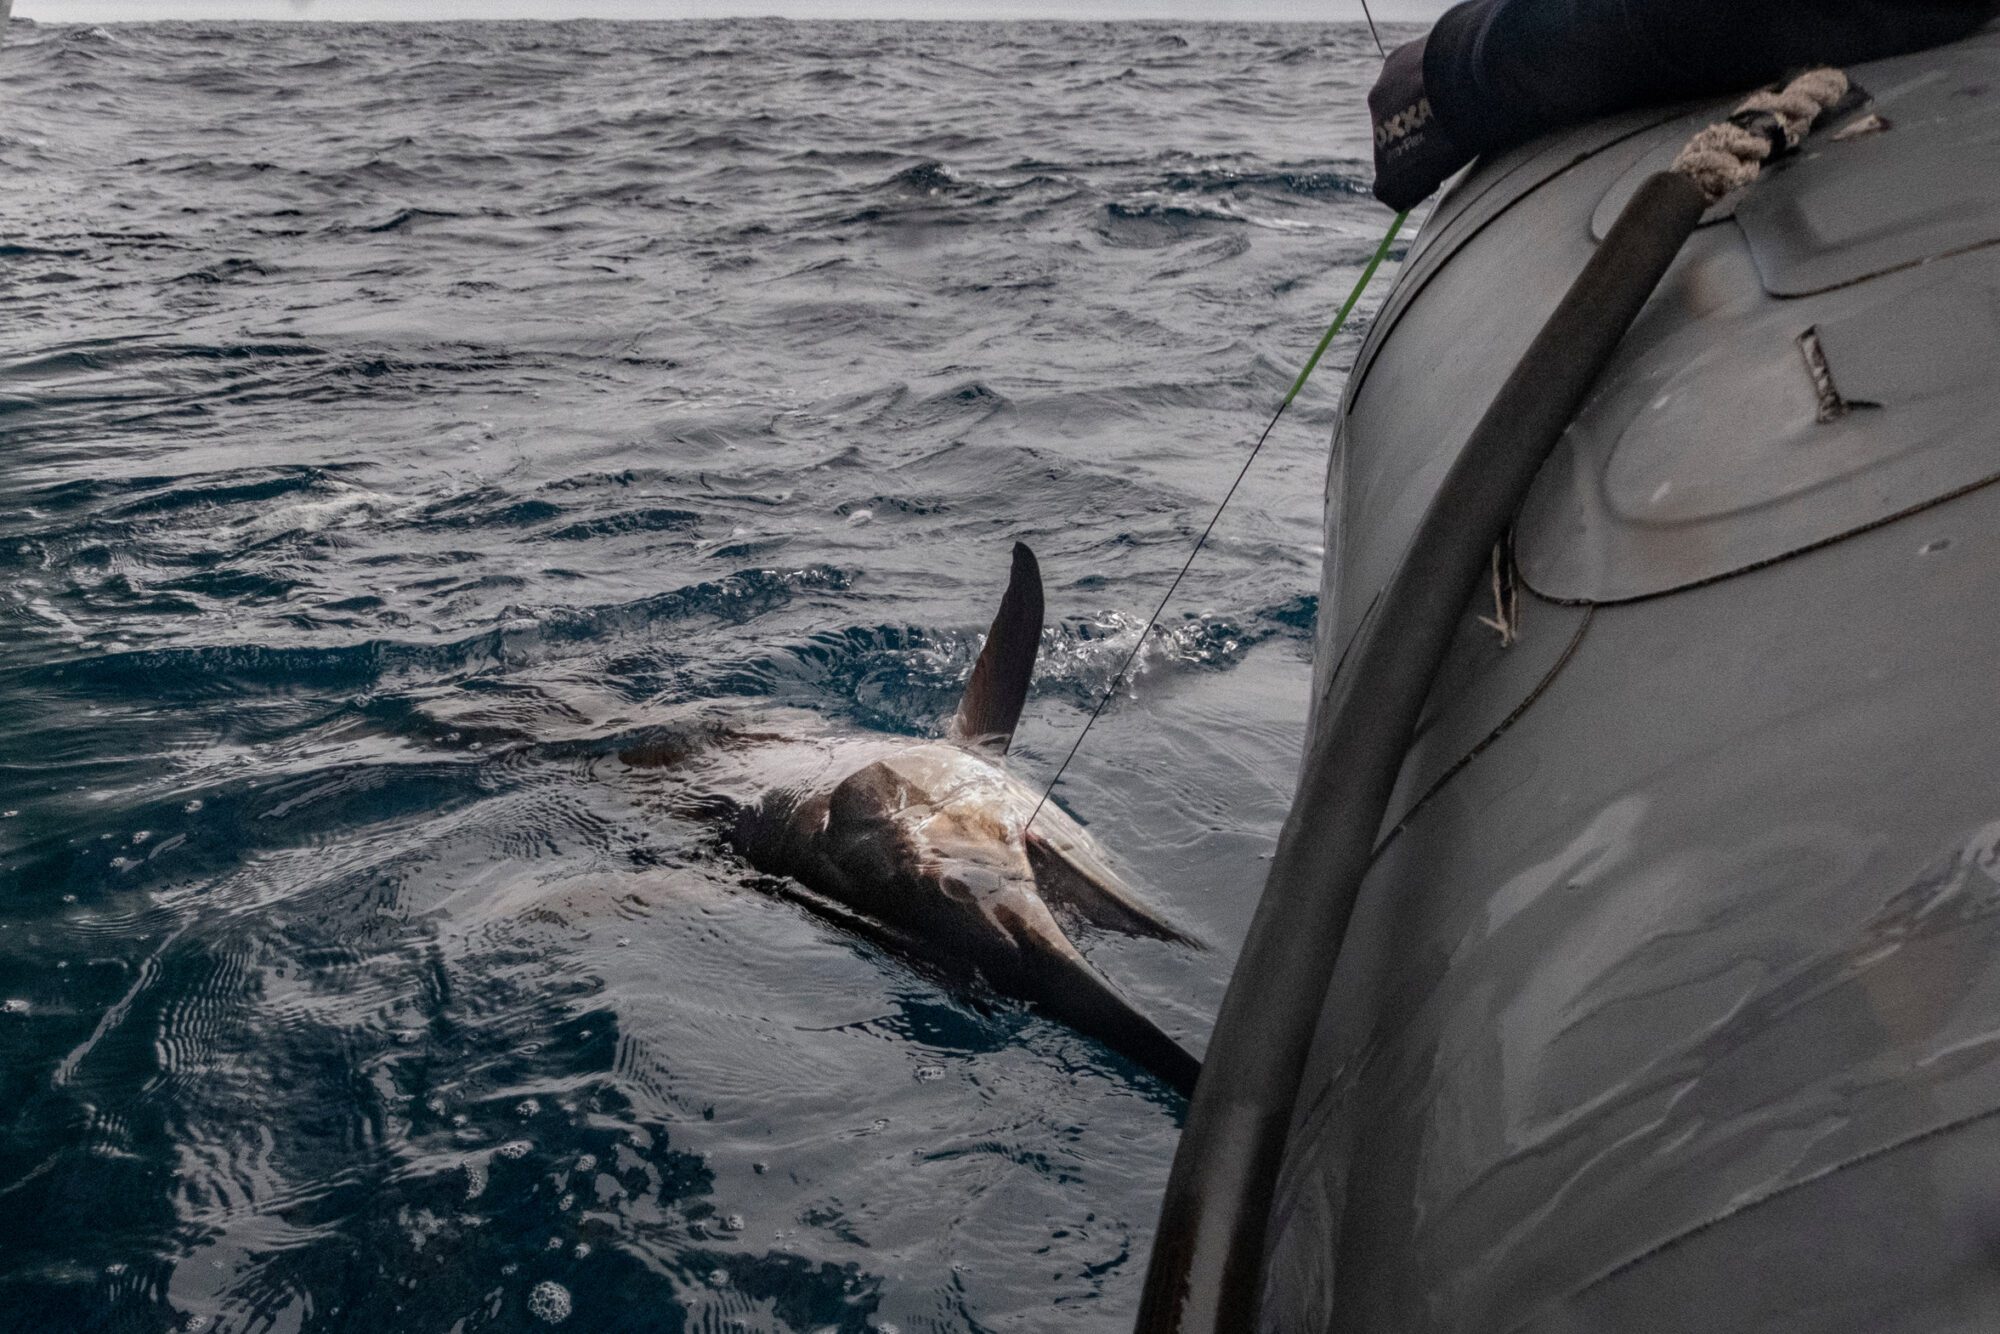 A swordfish caught on a fishing line lies on the surface of the water alongside a black inflatable boat